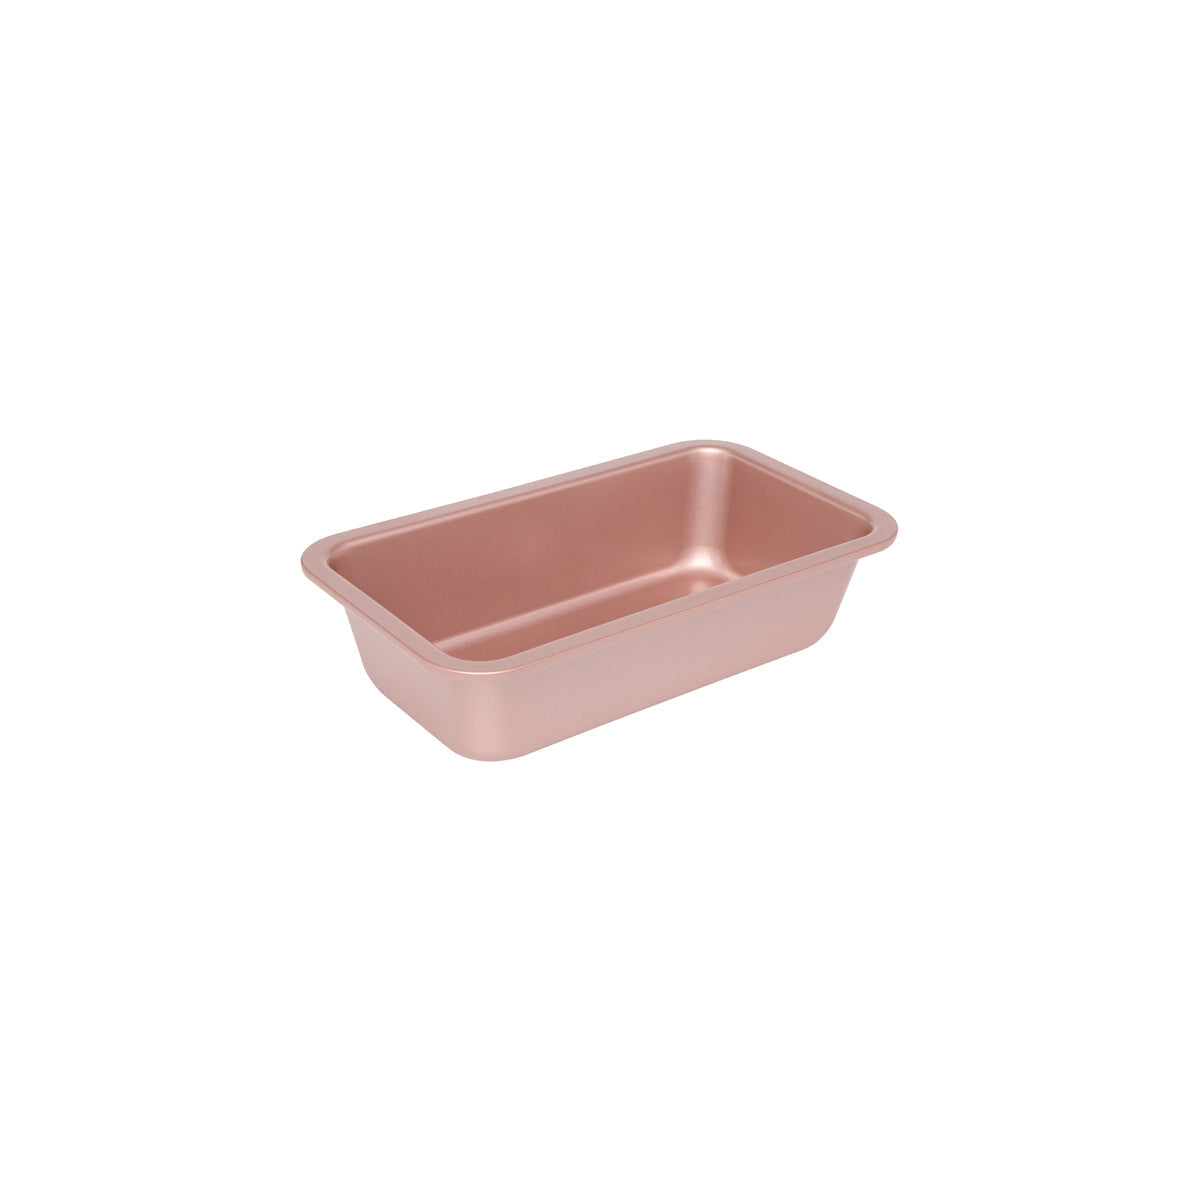 WLT40532 Wiltshire Rose Gold Loaf Pan 240m Tomkin Australia Hospitality Supplies